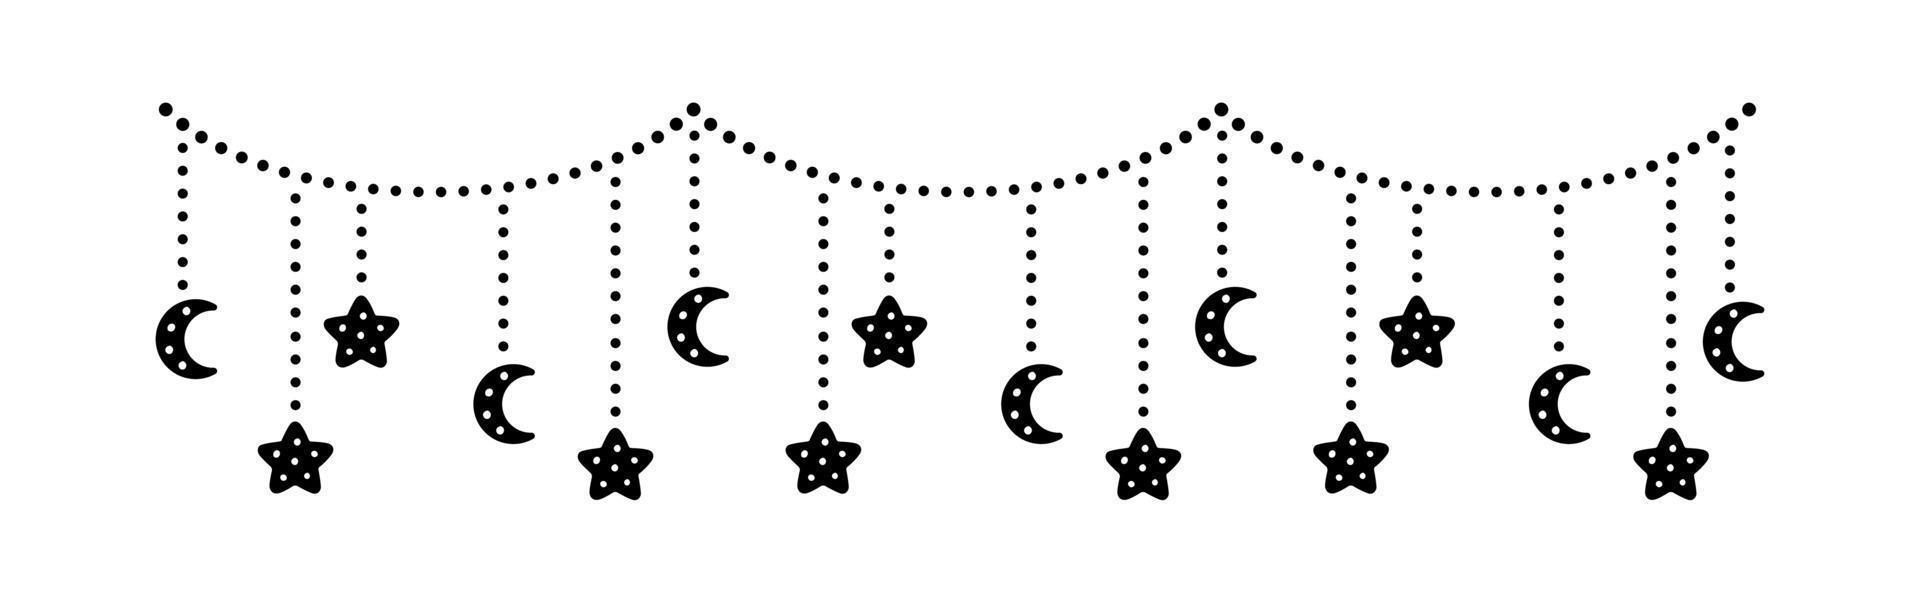 Moon and stars lights dangling bunting garland silhouette vector